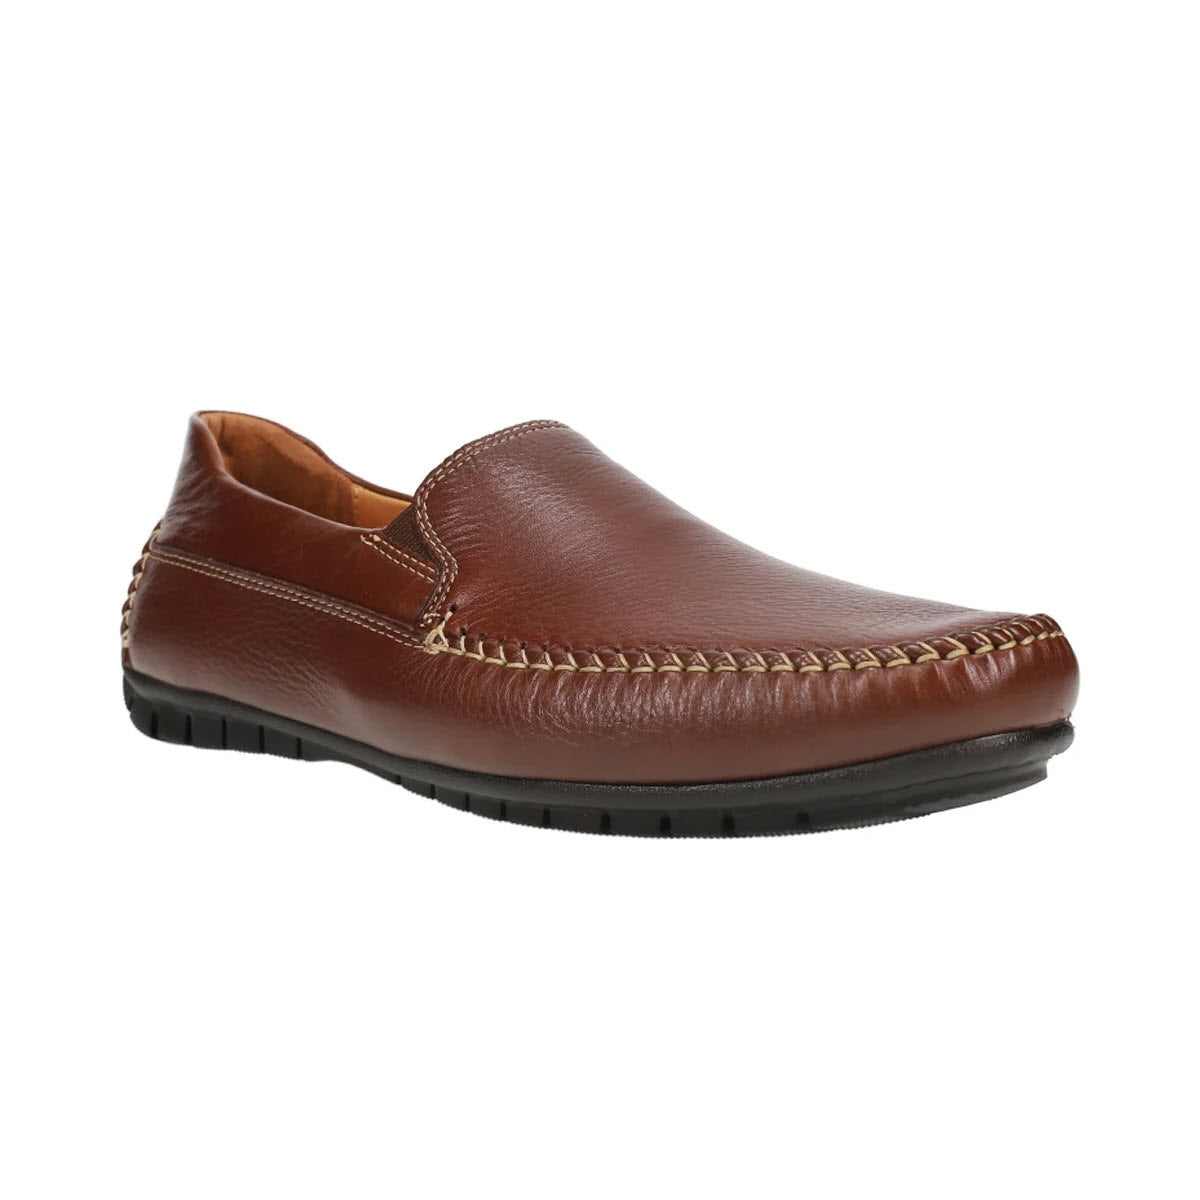 A mahogany leather Johnston &amp; Murphy Cort Whipstitch Venetian Men&#39;s Dress Shoe with stitched detailing and a black rubber sole, isolated on a white background.